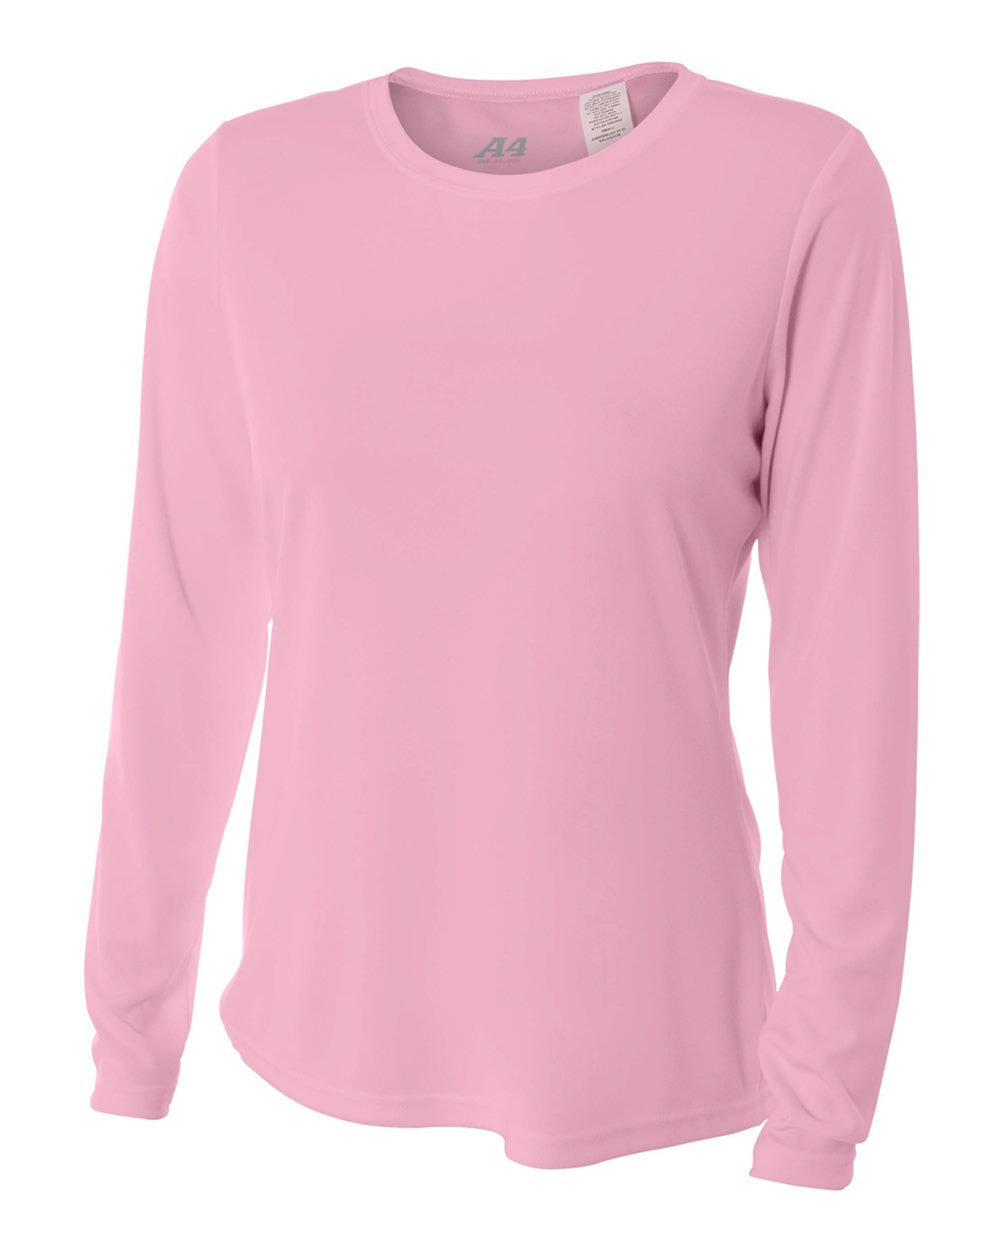 A4 Women&apos;s Performance Long Sleeve Crew (Pink)